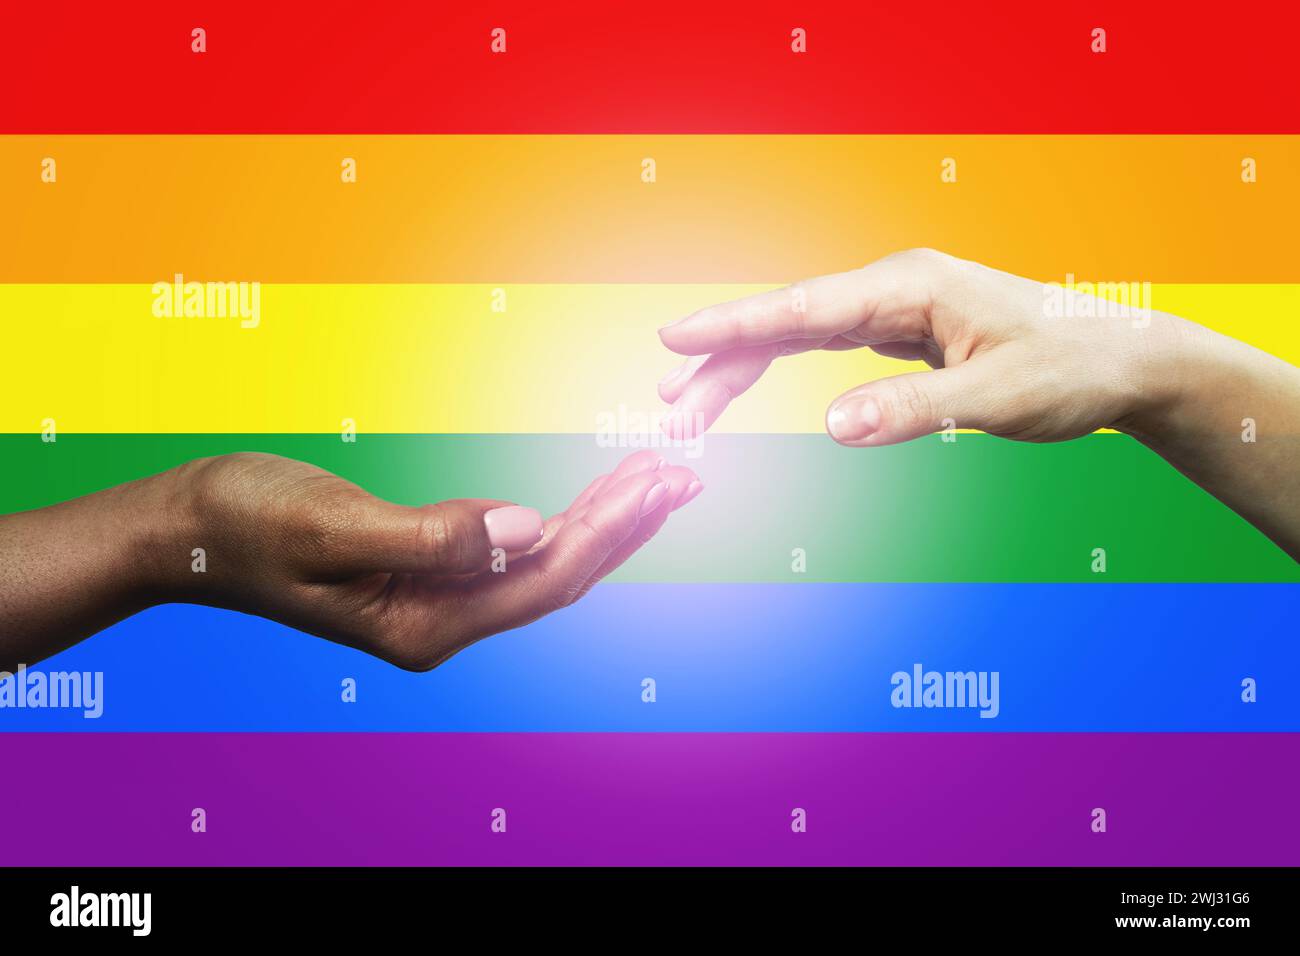 Female hands of diverse races against LGBT community flag Stock Photo